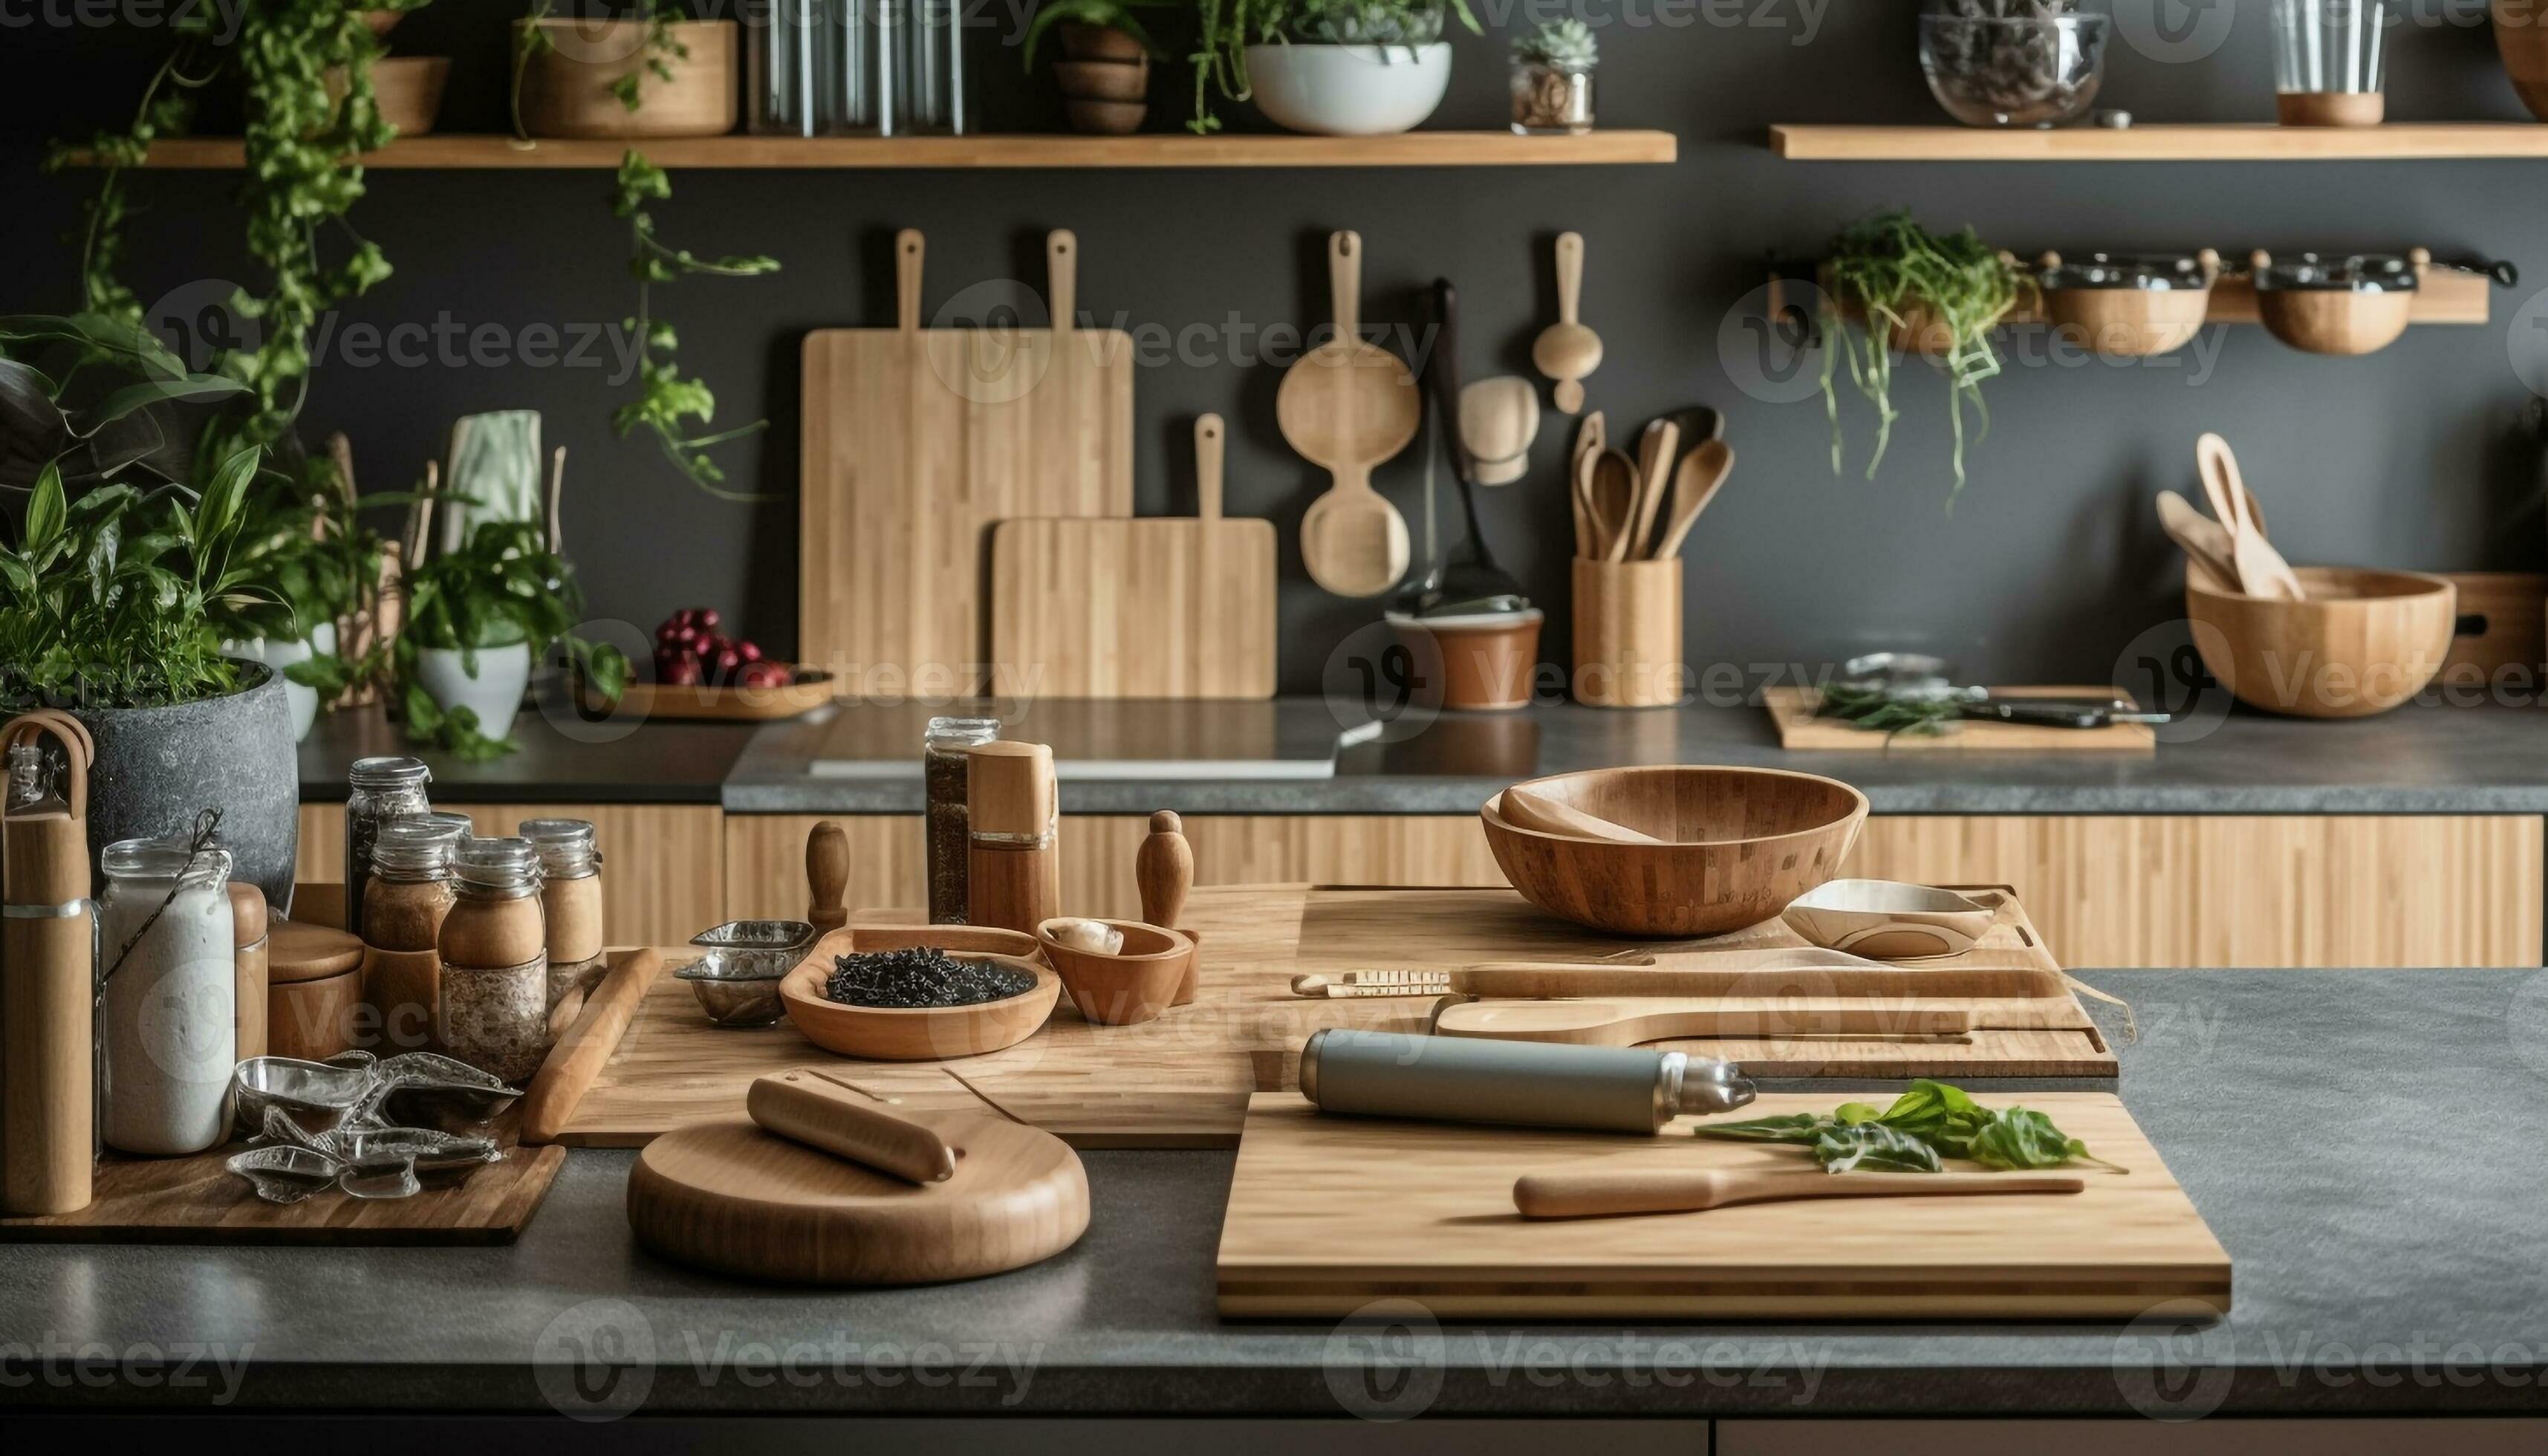 https://static.vecteezy.com/system/resources/previews/024/926/282/large_2x/rustic-kitchen-utensils-on-wooden-table-for-homemade-meal-preparation-generated-by-ai-photo.jpg